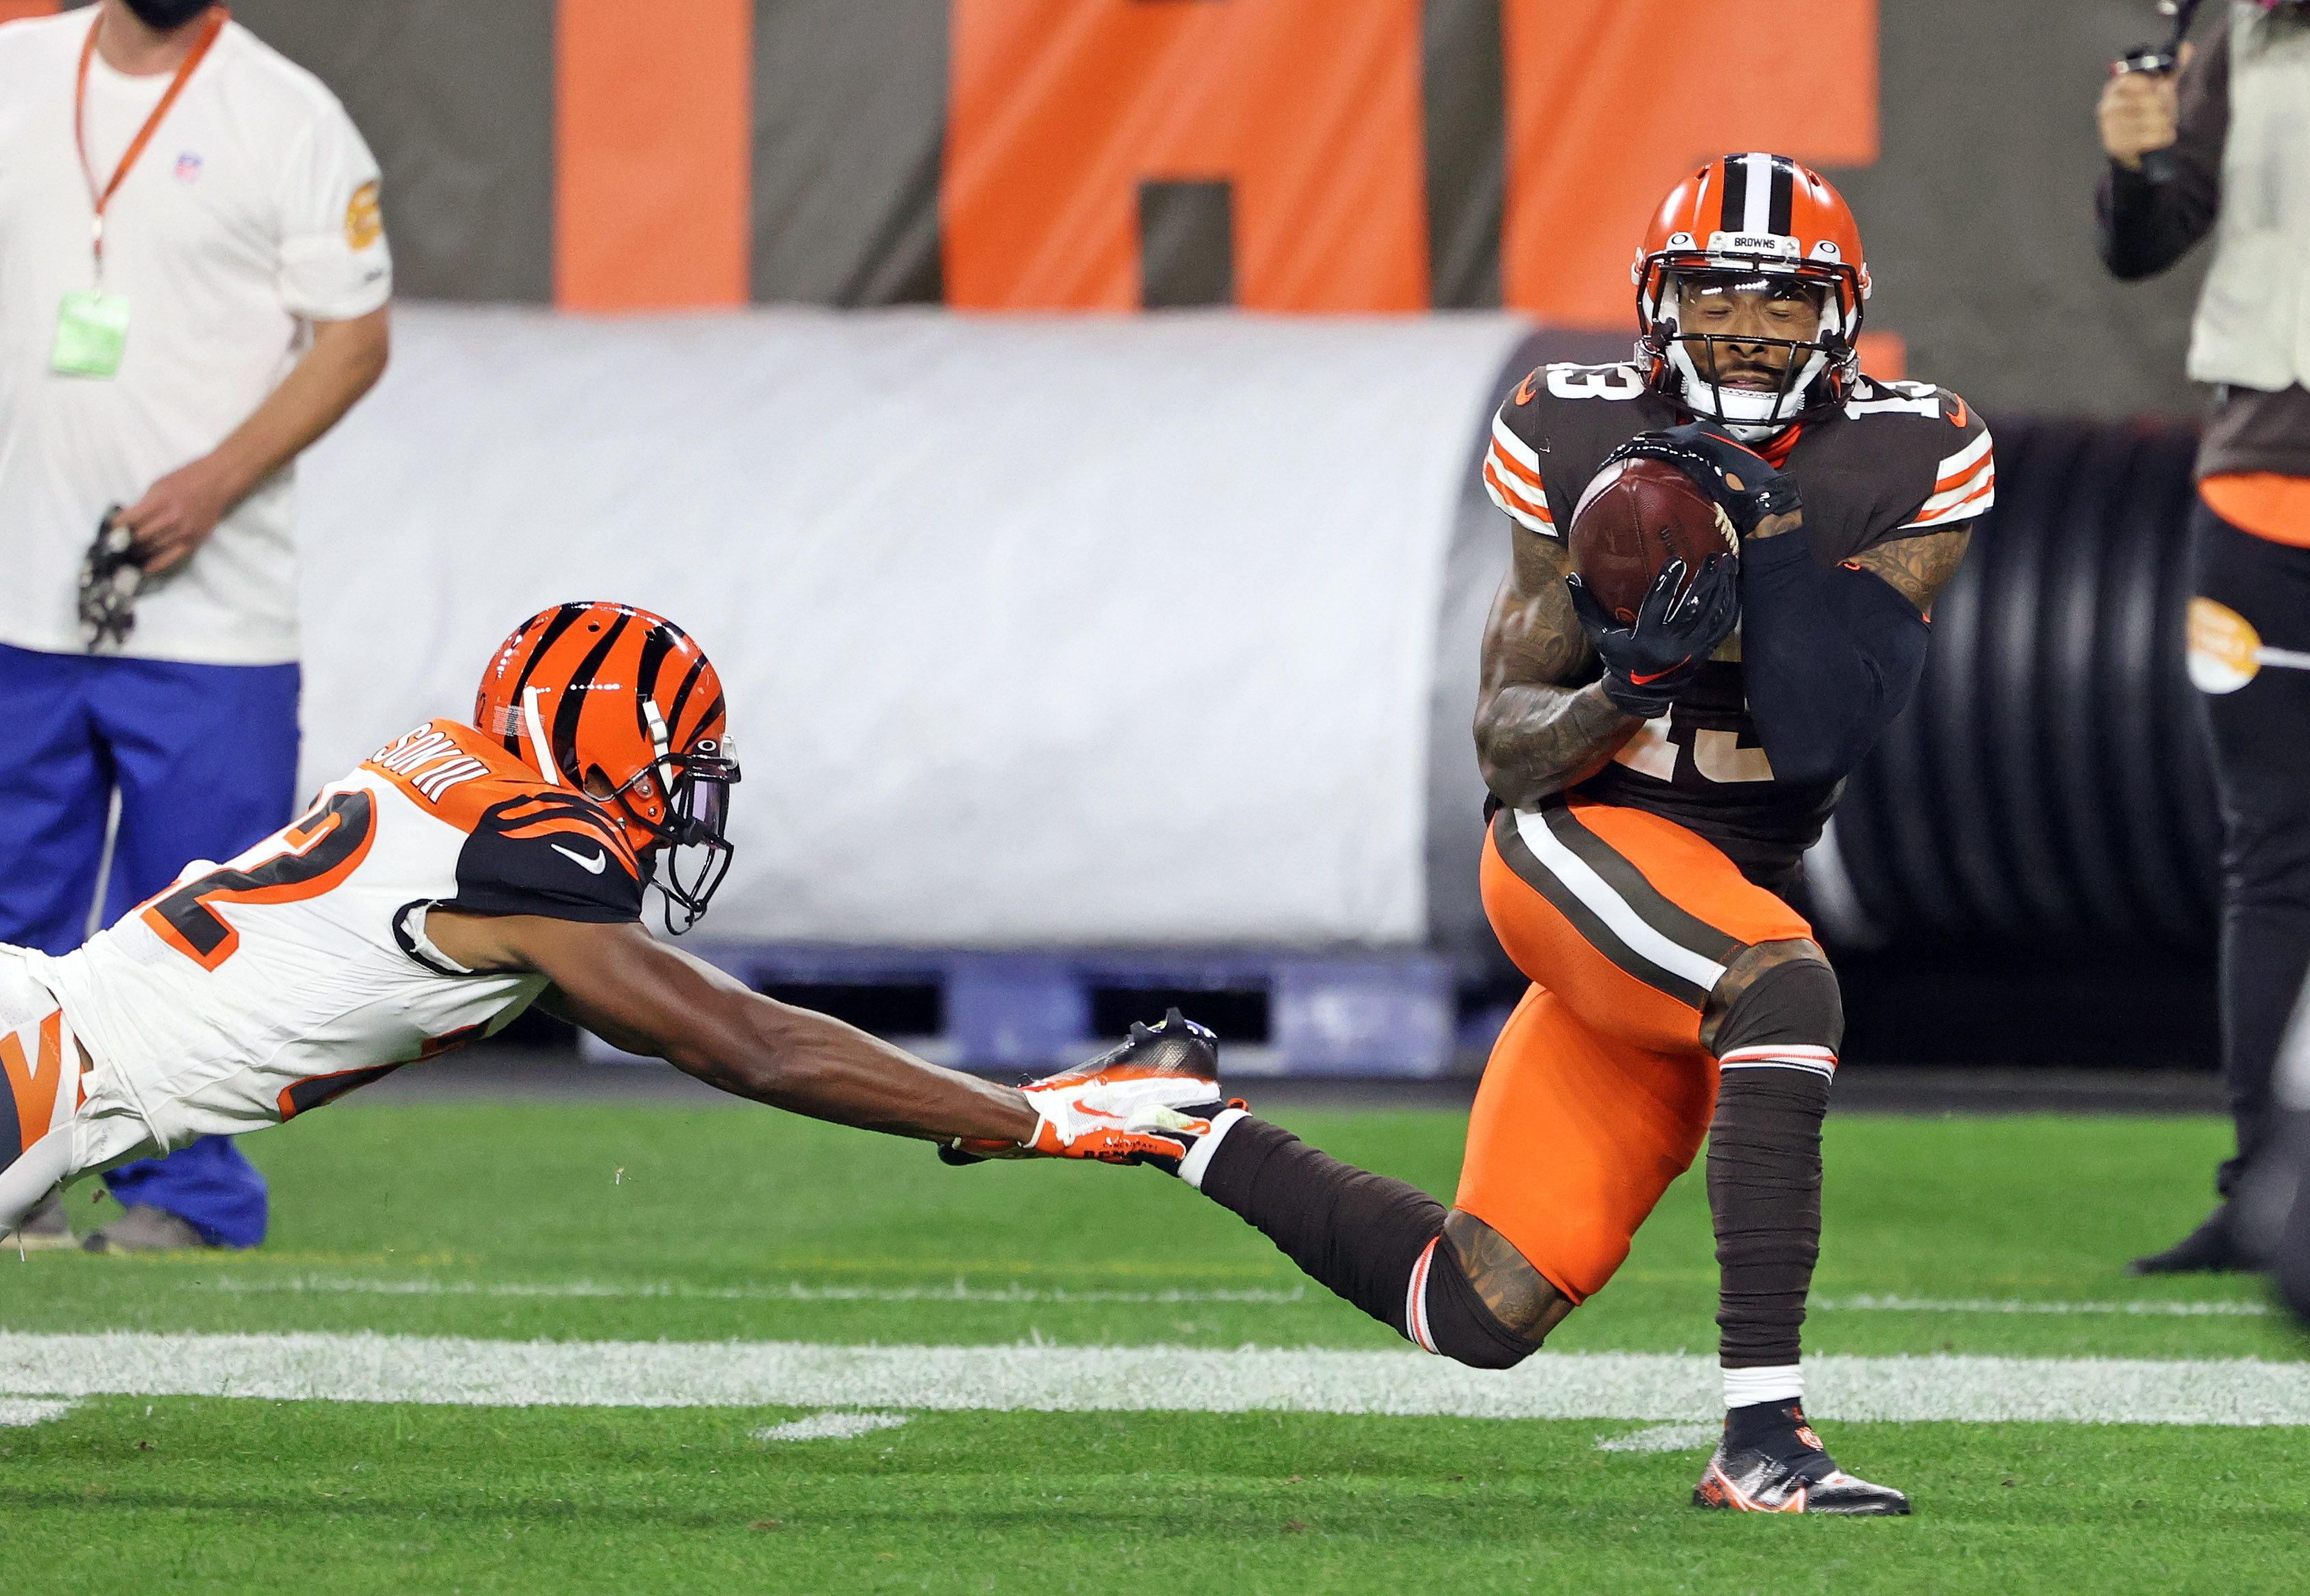 How to view Cincinnati Bengals v. Cleveland Browns game if you're